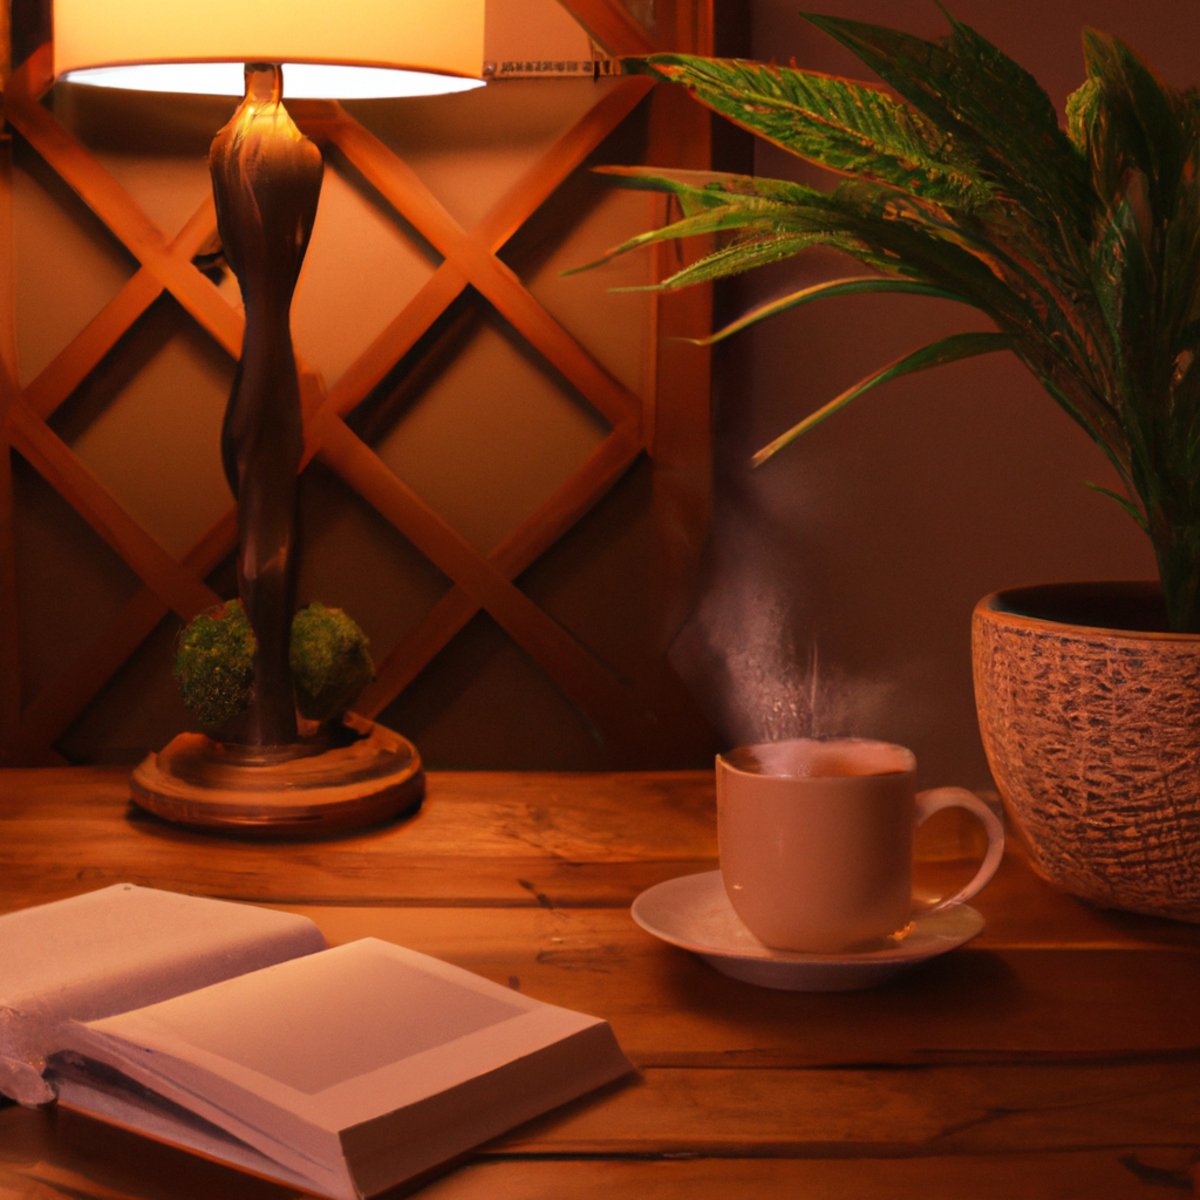 Cozy scene with tea, book, and plant invites relaxation.